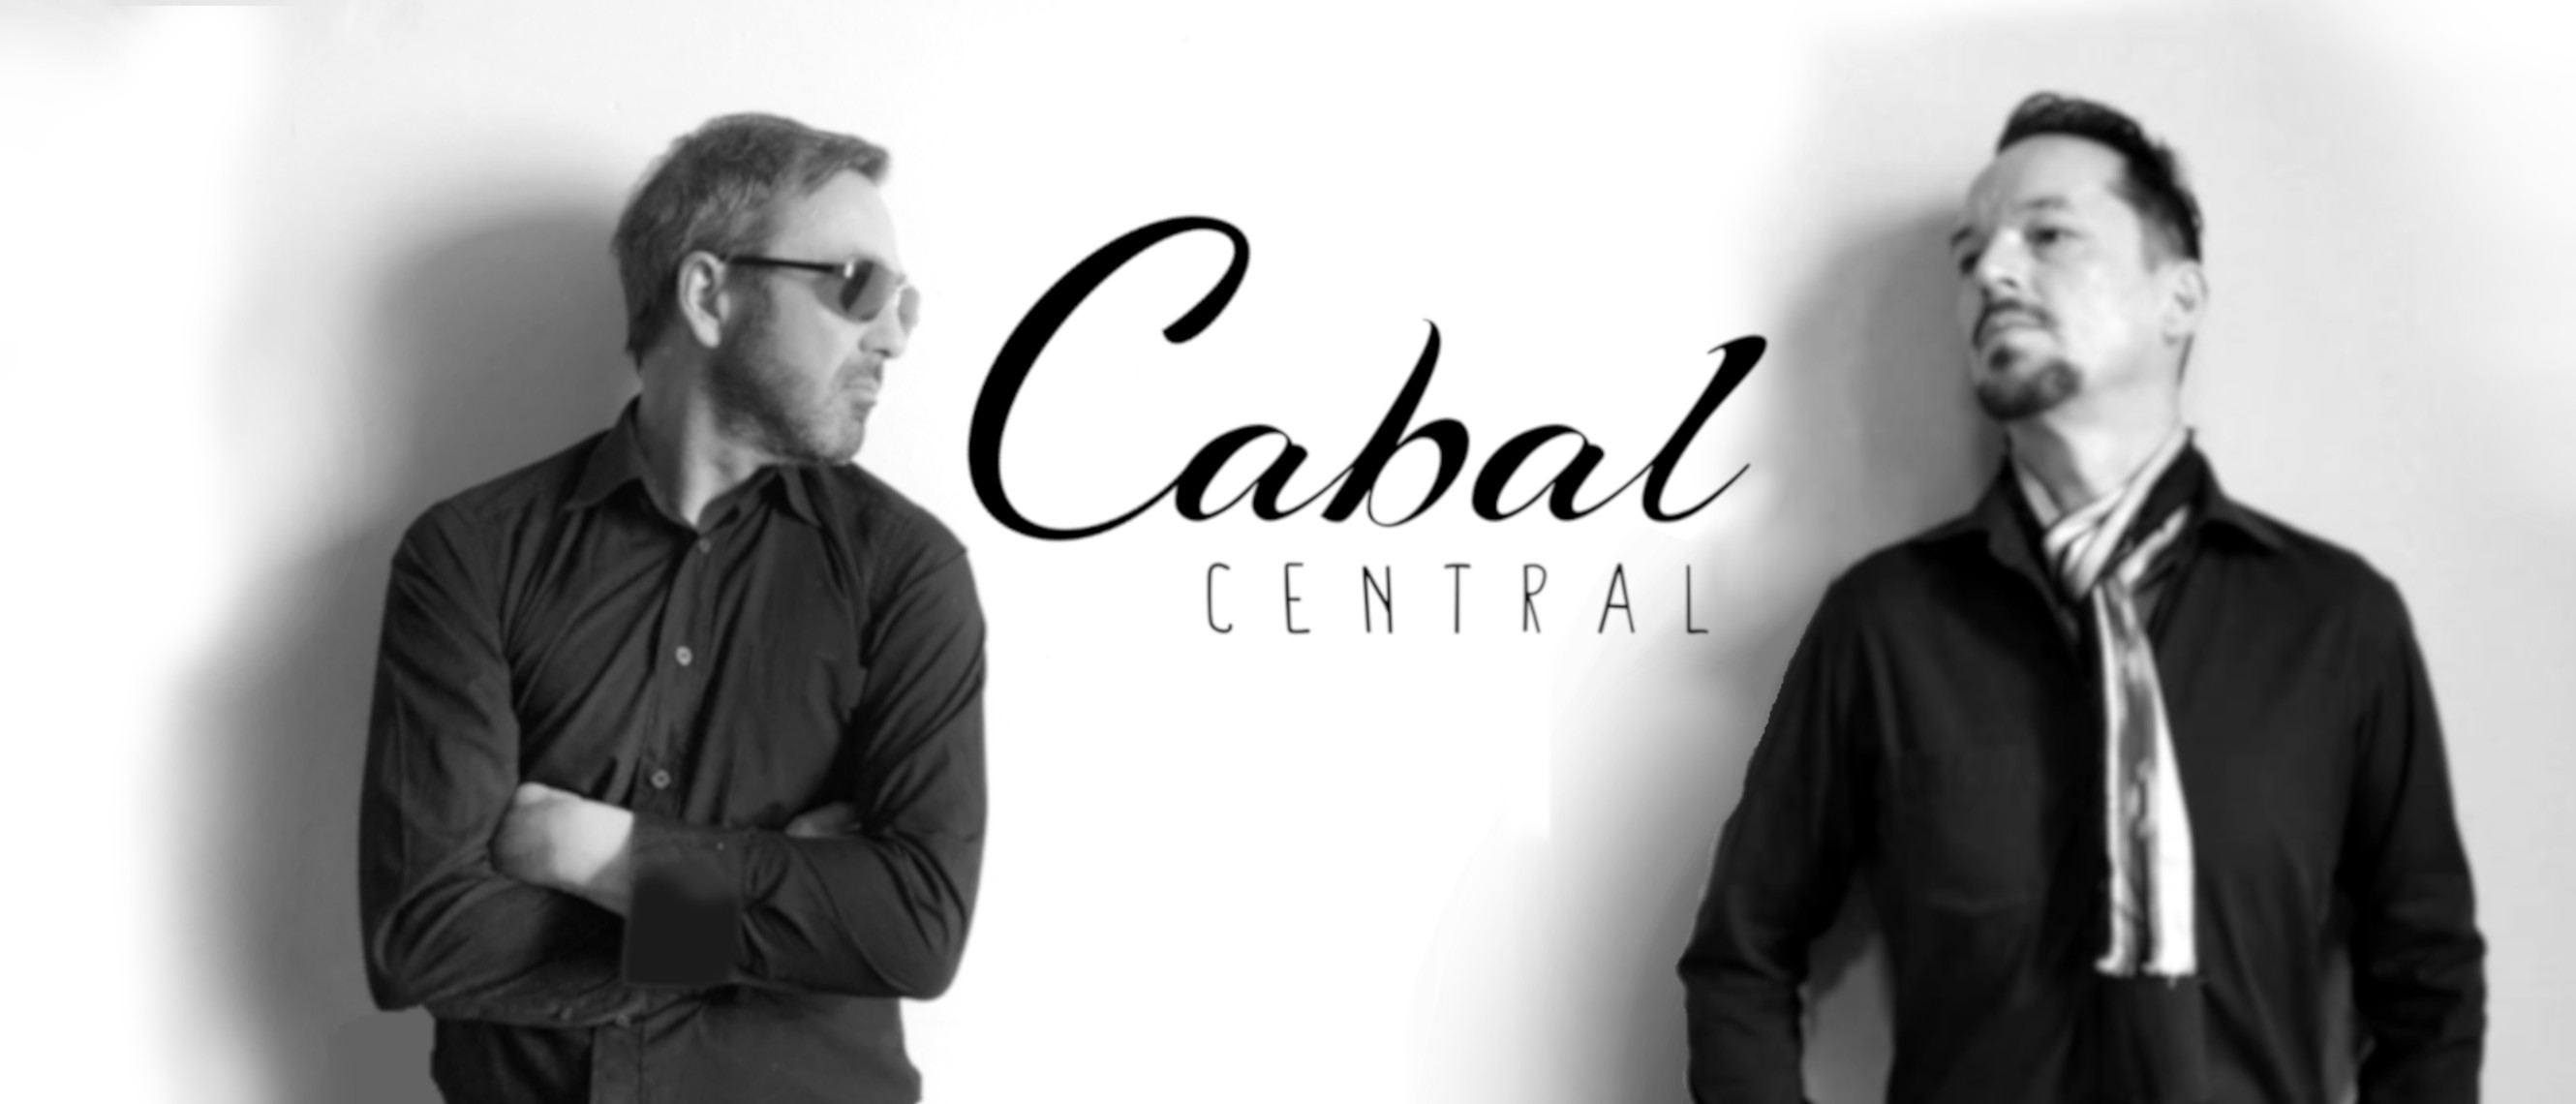 Genre-shaping, Contrasting Smoky Vocals with Energetic Music: This is Cabal Central